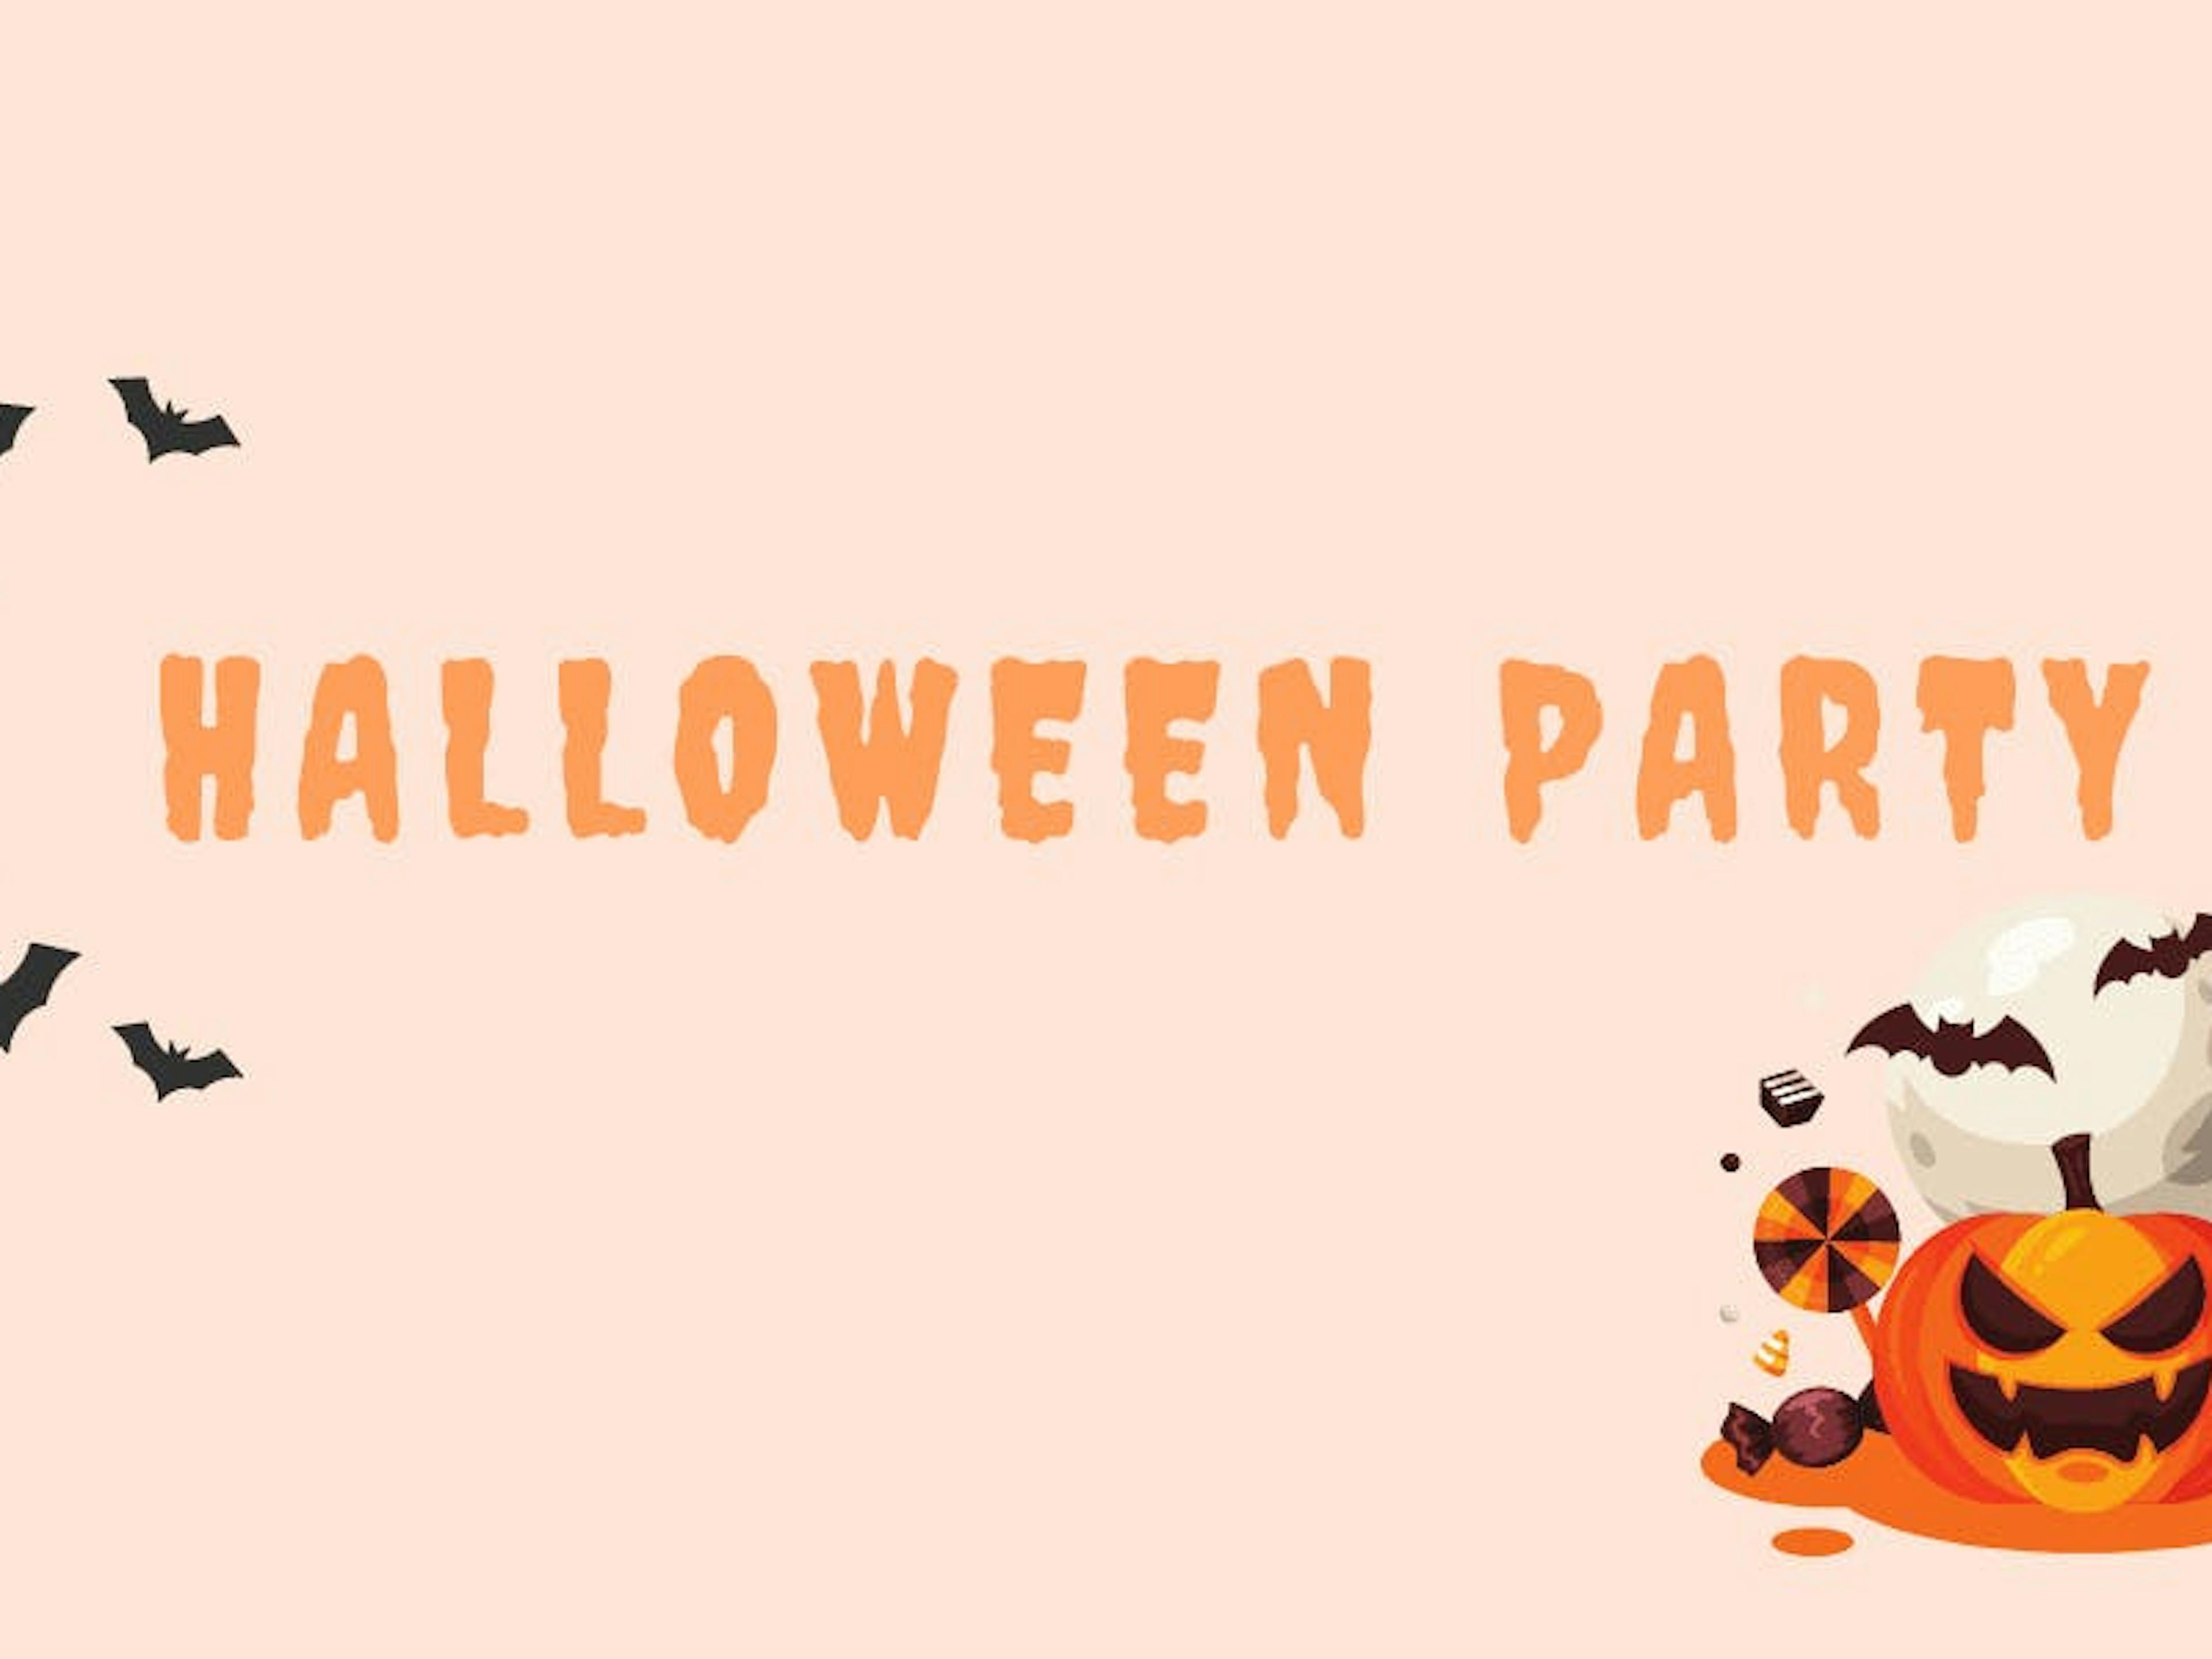 Hallloween Party with Forwardme in 2020